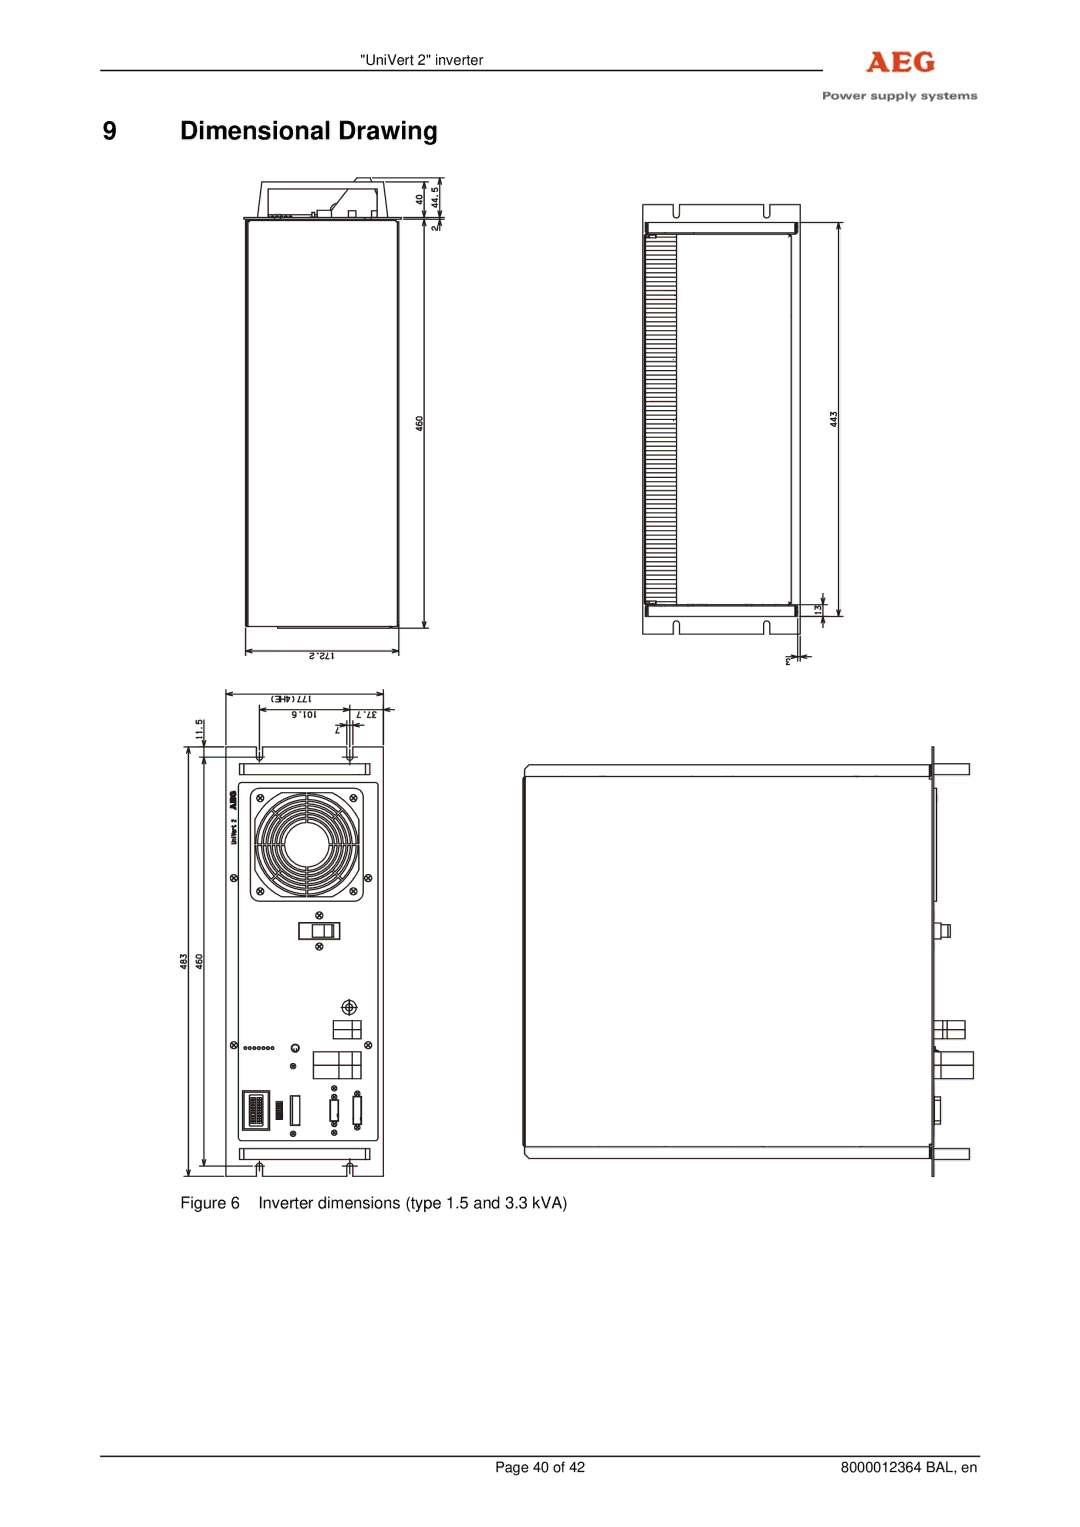 AEG 8000012364 BAL operating instructions Dimensional Drawing, Inverter dimensions type 1.5 and 3.3 kVA 